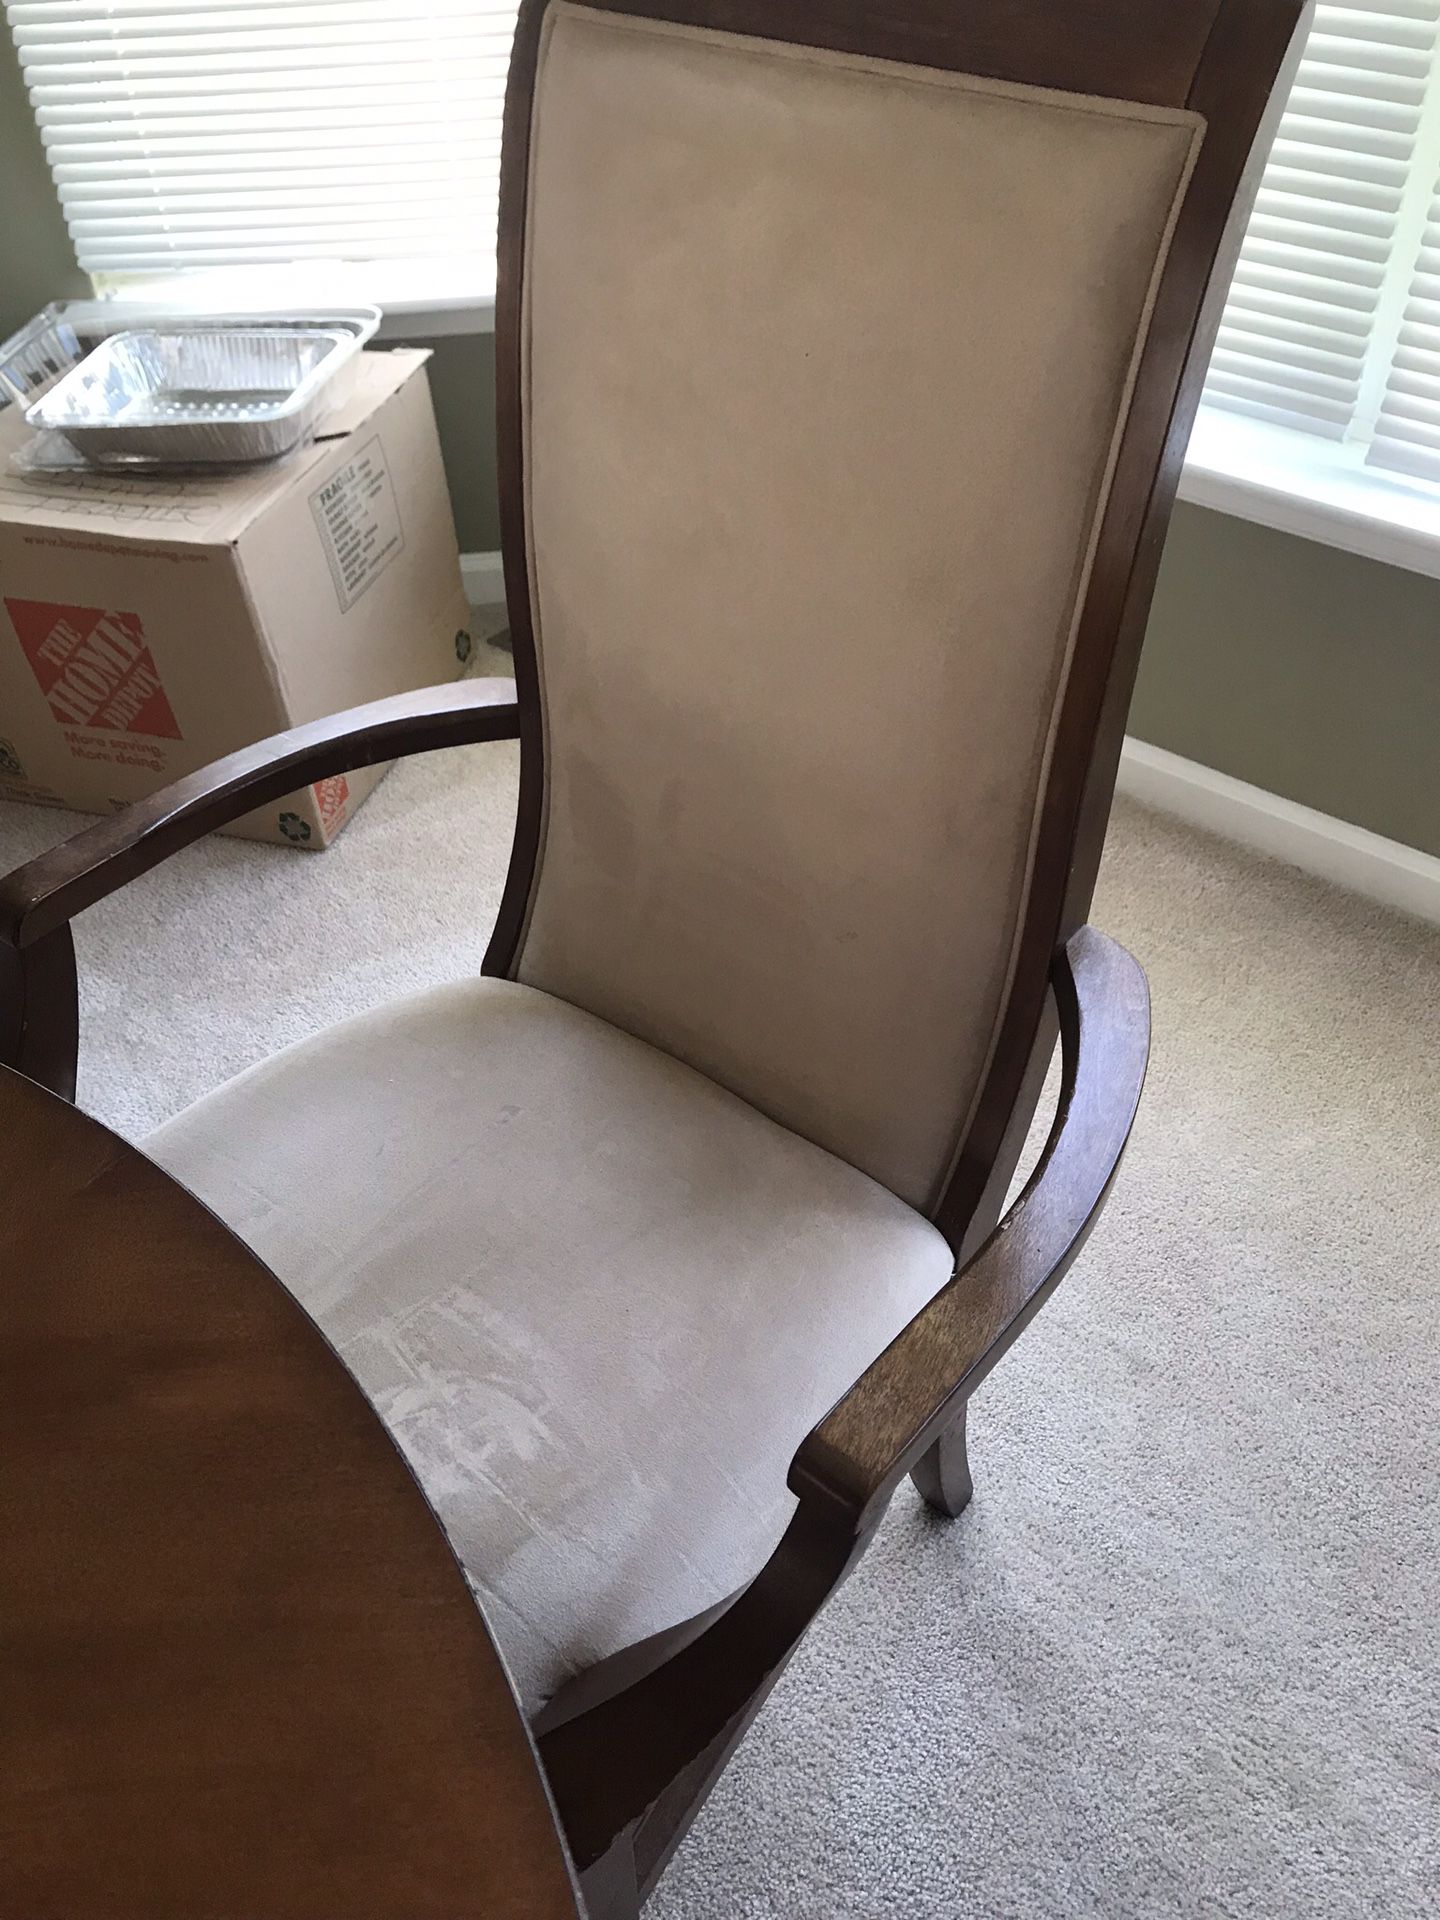 Dinette Set. Table with two leafs and 6 chairs. Good condition. Just had Chairs cleaned.